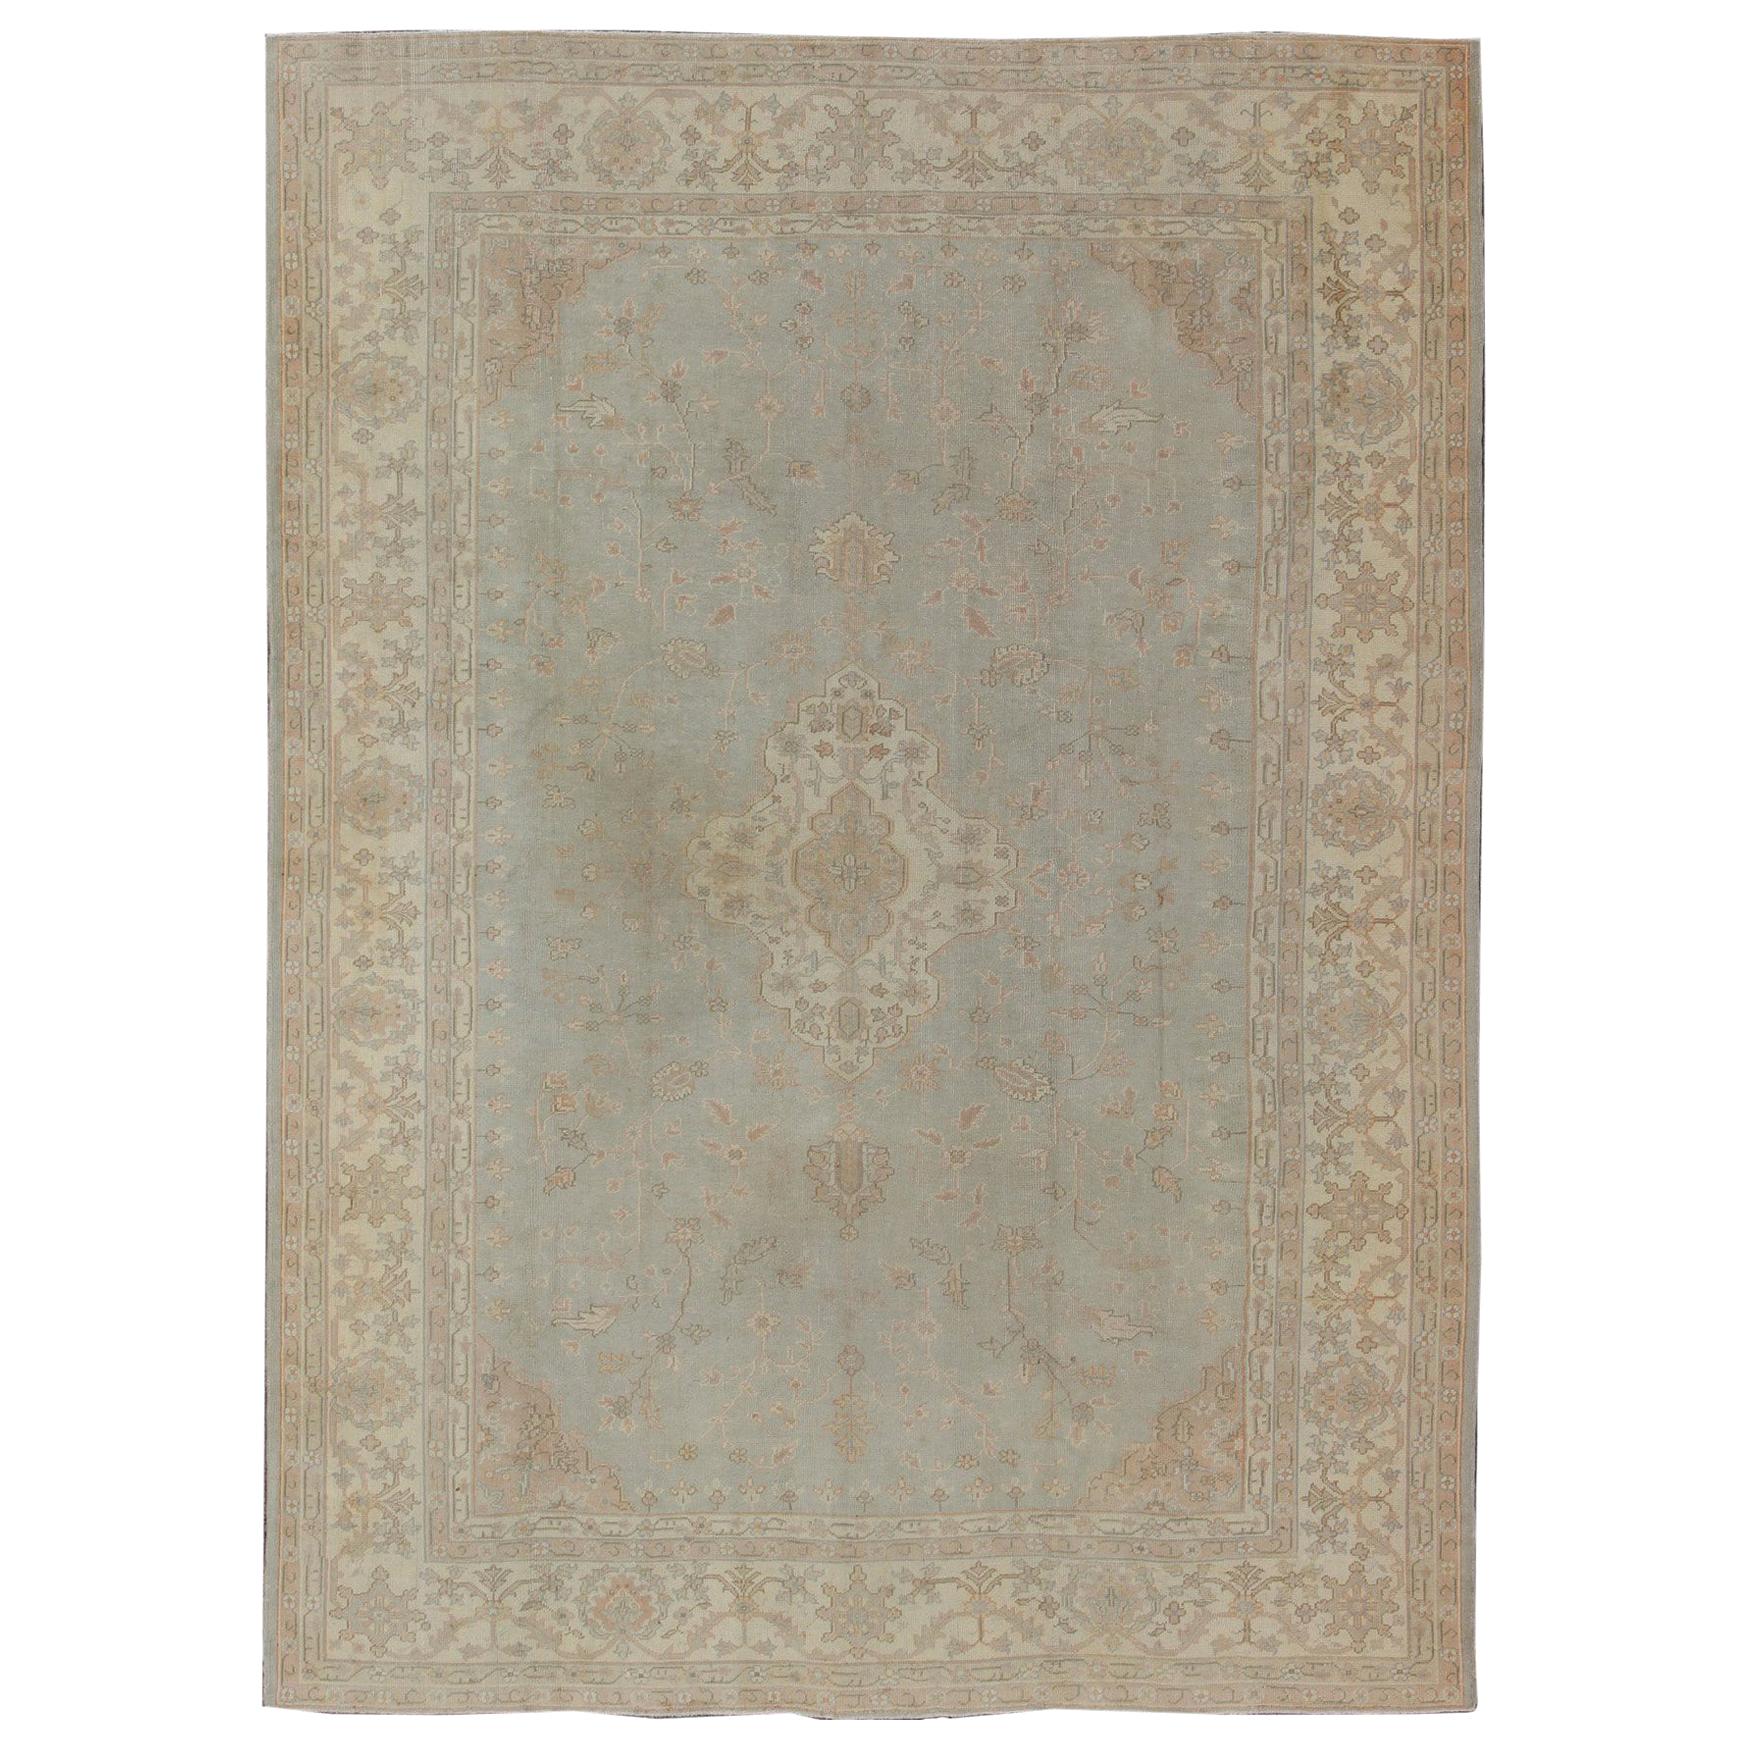 Antique Oushak Carpet in Pale Gray Blue, Taupe, Pink, Ivory and Light Salmon